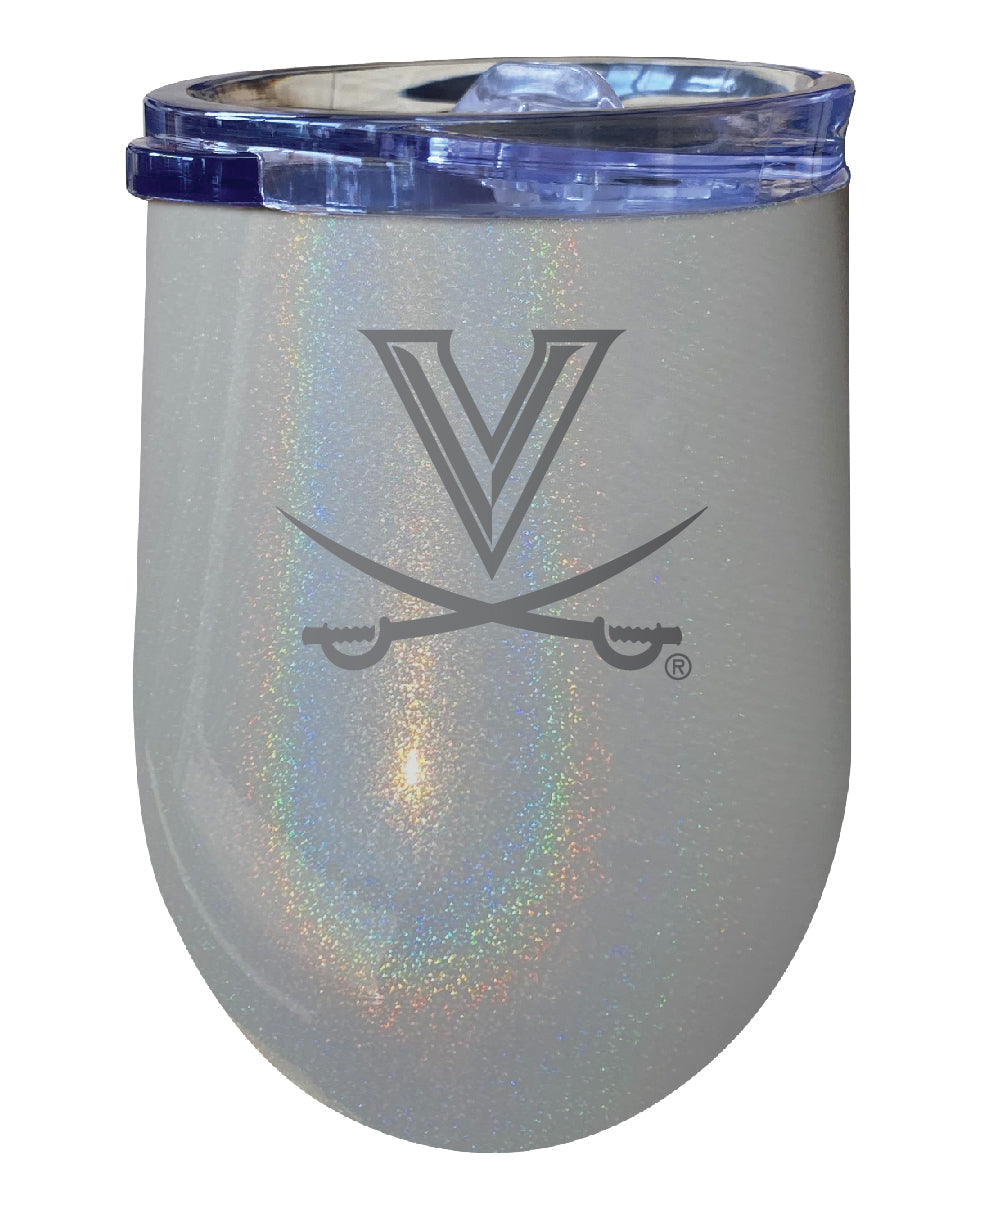 Virginia Cavaliers NCAA Laser-Etched Wine Tumbler - 12oz Rainbow Glitter Gray Stainless Steel Insulated Cup